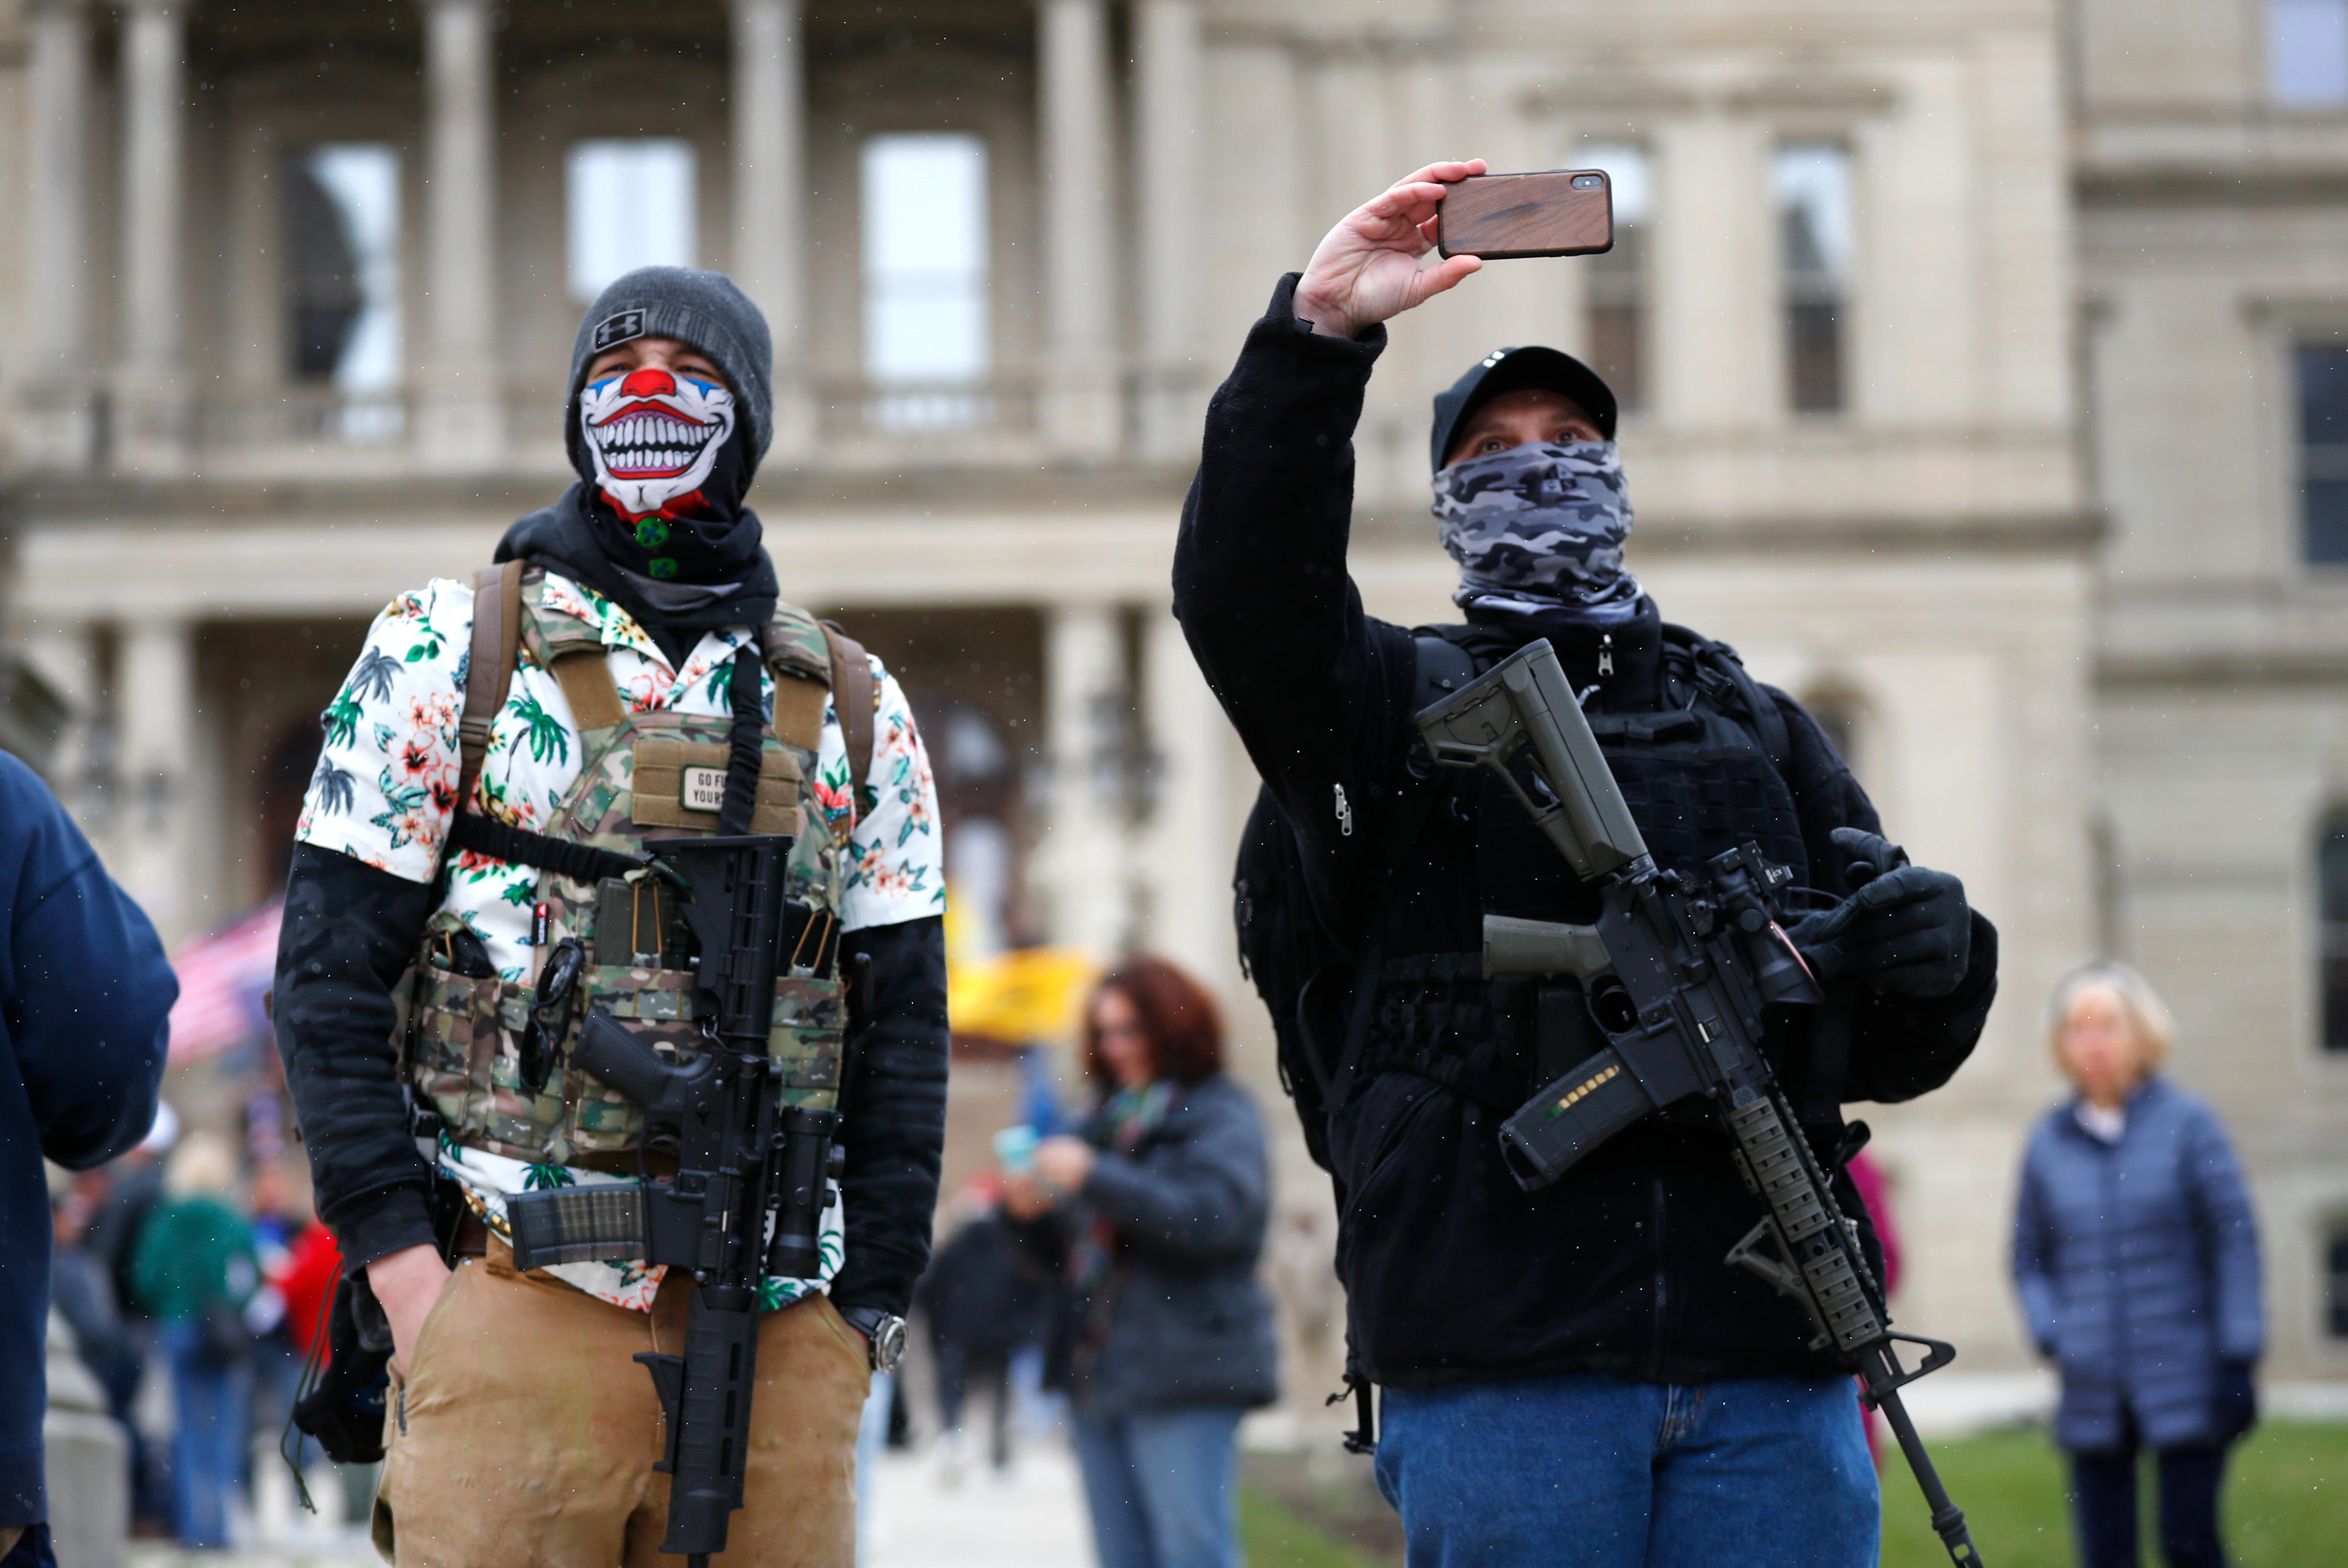 People with rifles watch outside the state Capitol in Lansing on Wednesday, April 15, 2020, to protest Gov. Gretchen Whitmer ' s orders to keep people at home and businesses locked during the COVID-19 outbreak